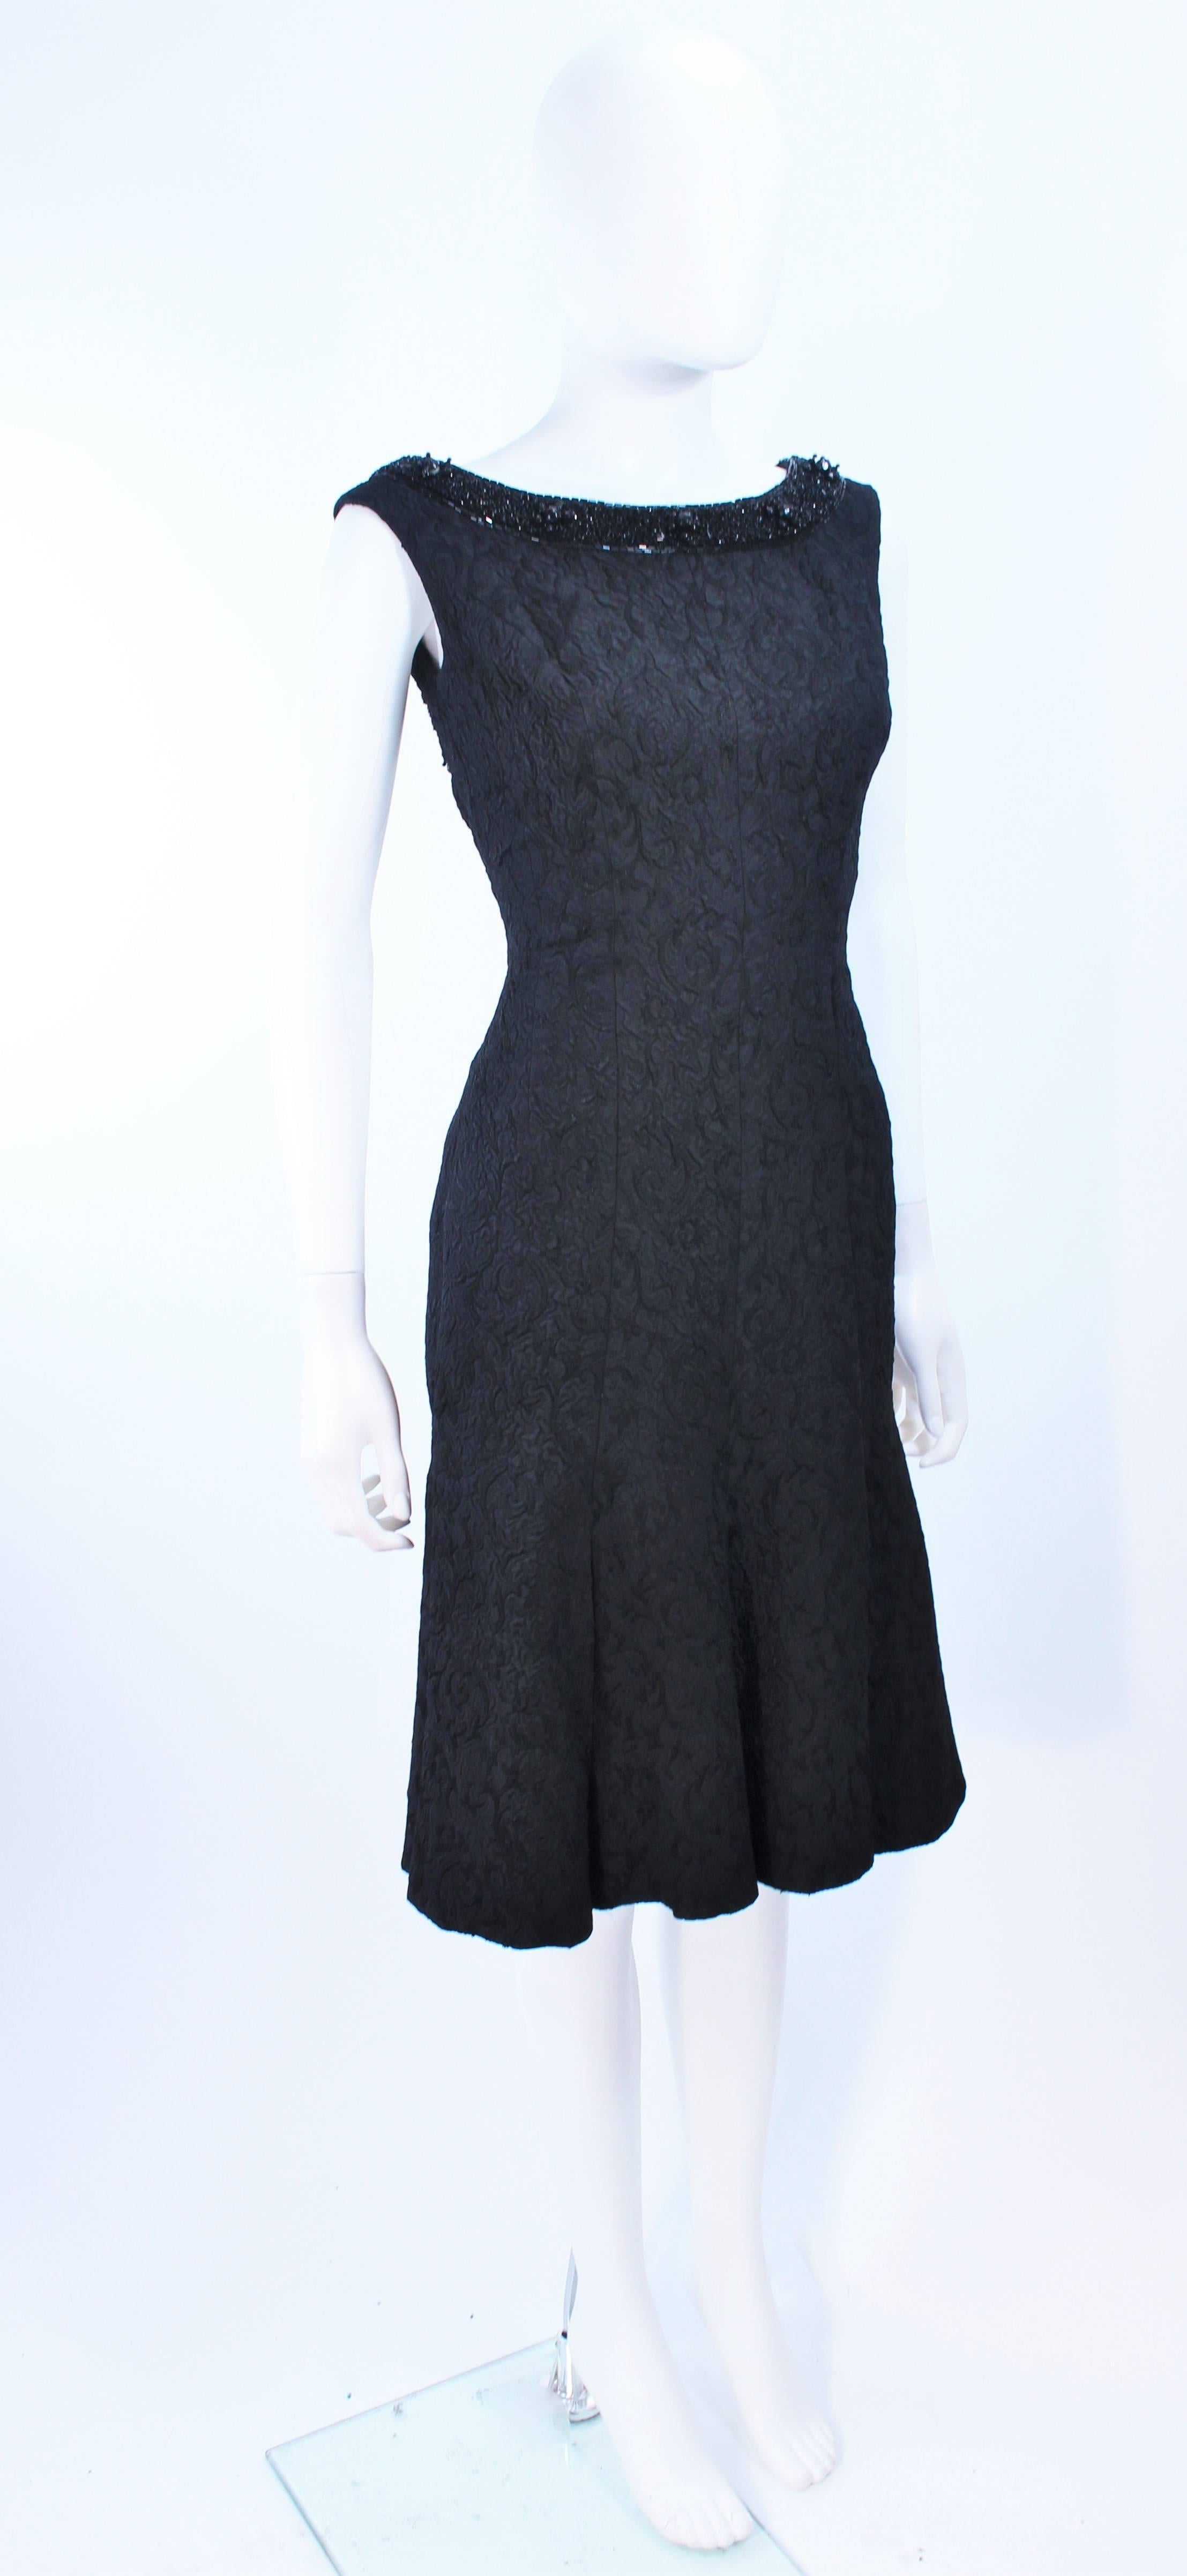 Vintage 1960's Black Brocade Cocktail Dress with Beaded Neckline Size 2 In Excellent Condition For Sale In Los Angeles, CA